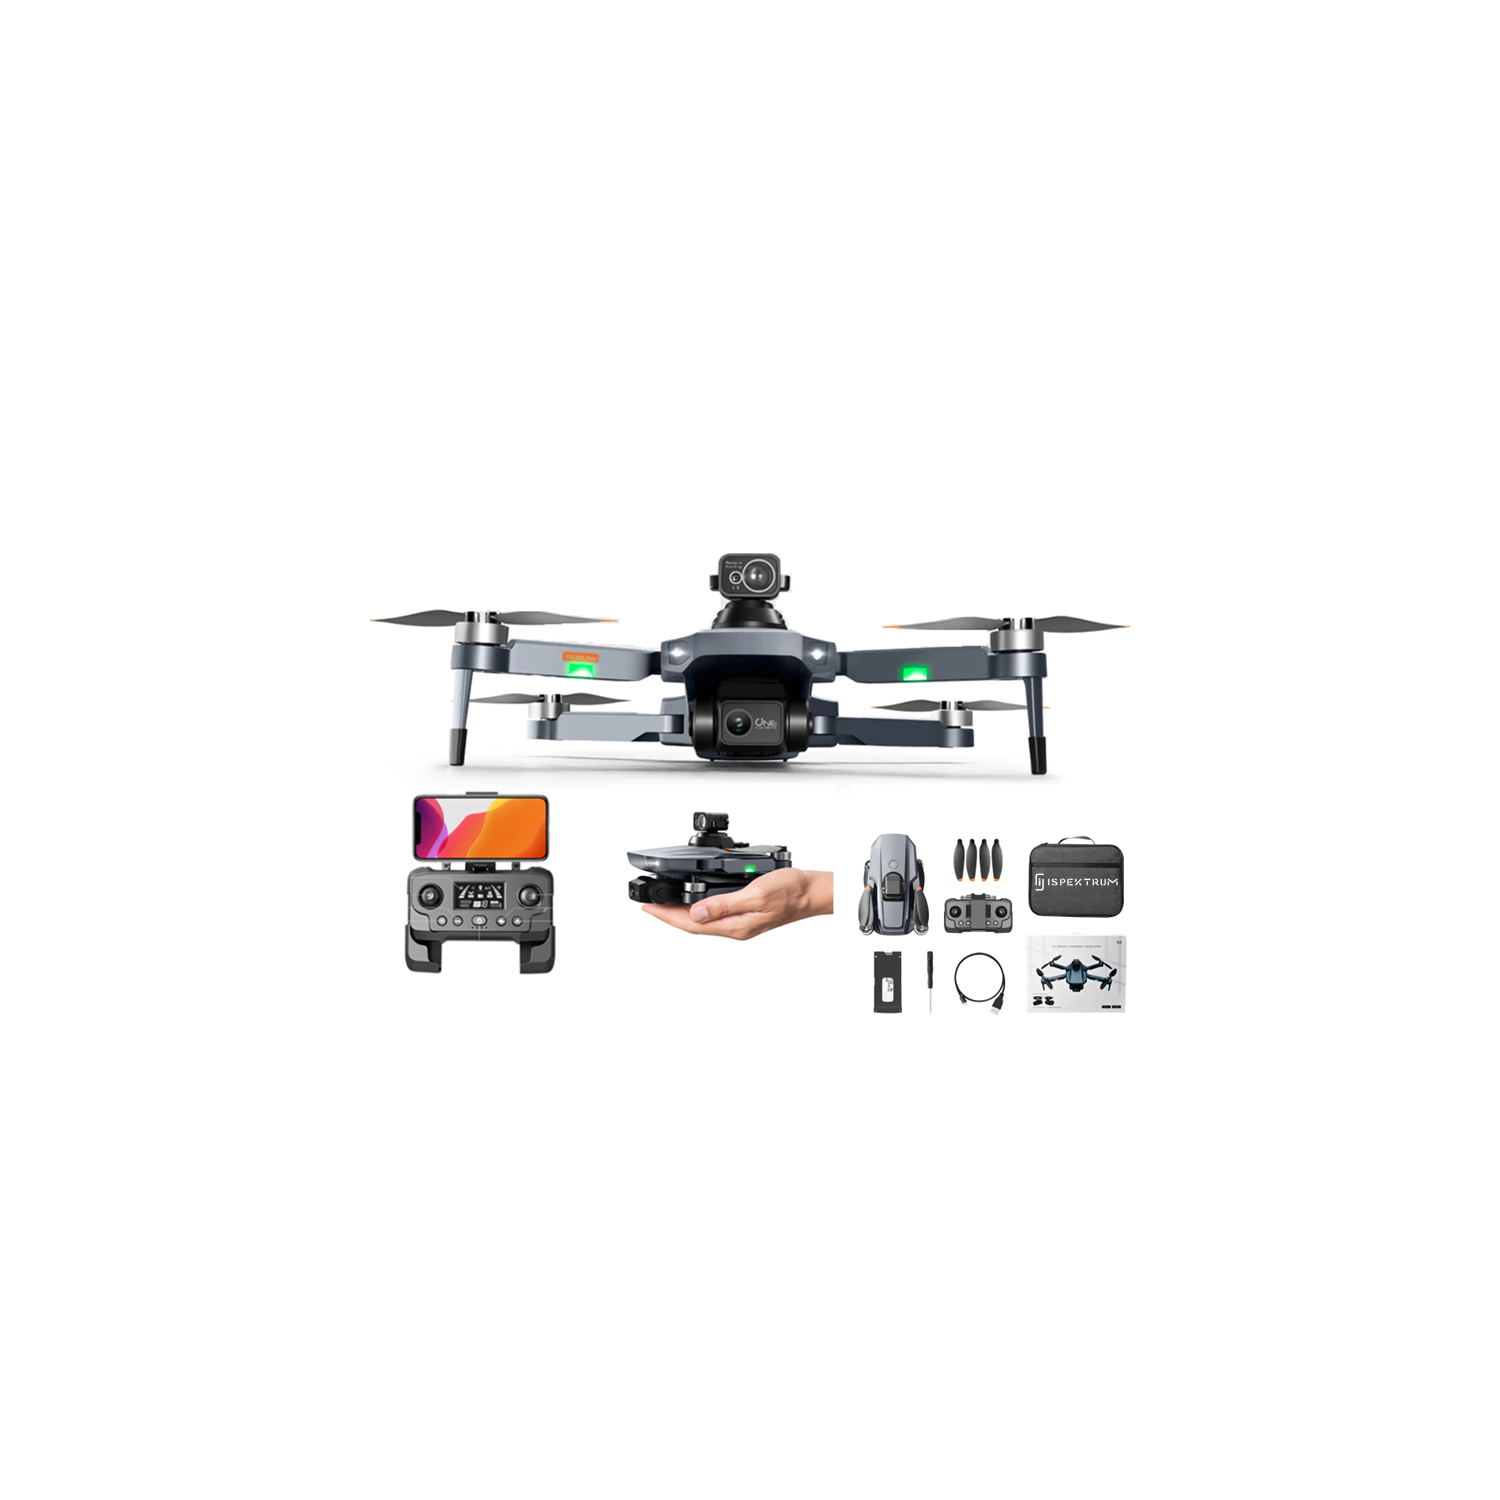 ISPEKTRUM RG101 Pro Drone 4K Dual Camera 2-Axis Gimbal 360 Obstacle Avoidance 30-Min Flight Time RC Quadcopter with Advanced Auto Return, 3km Video Transmission